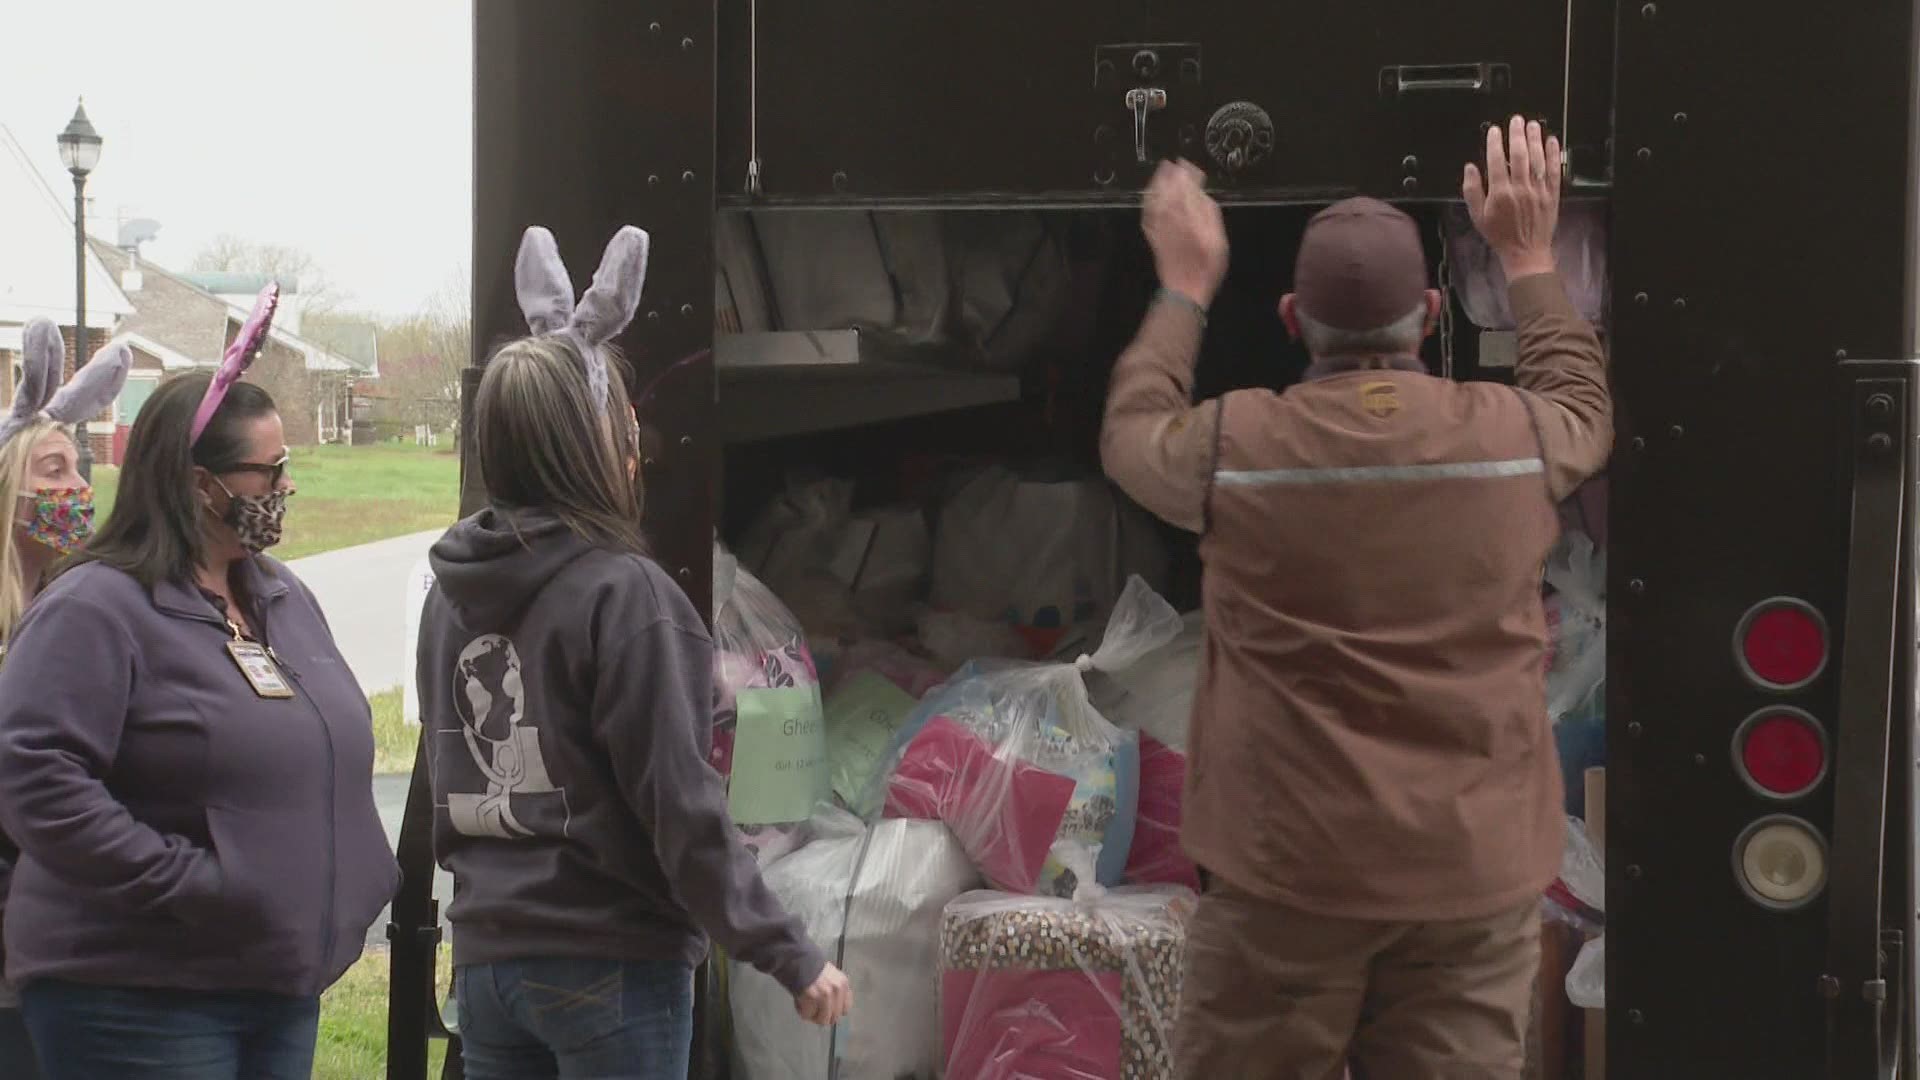 The Home of the Innocents in Butchertown provides a safe haven for abused and neglected children in our community. Thursday, UPS gifted them with Easter baskets.